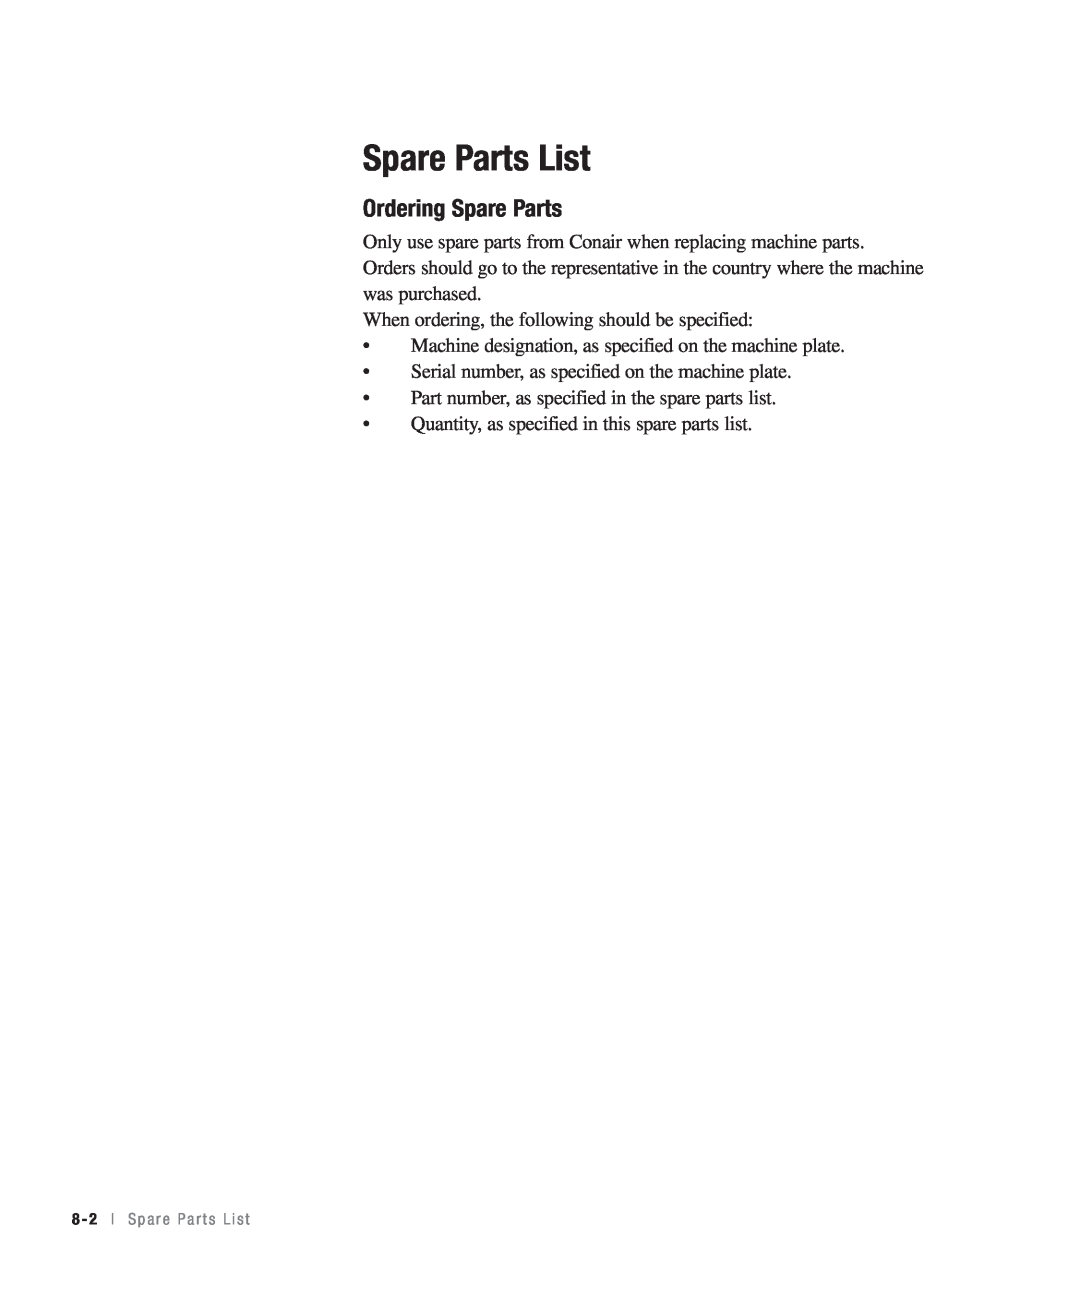 Conair CHS-810 manual Spare Parts List, Ordering Spare Parts 